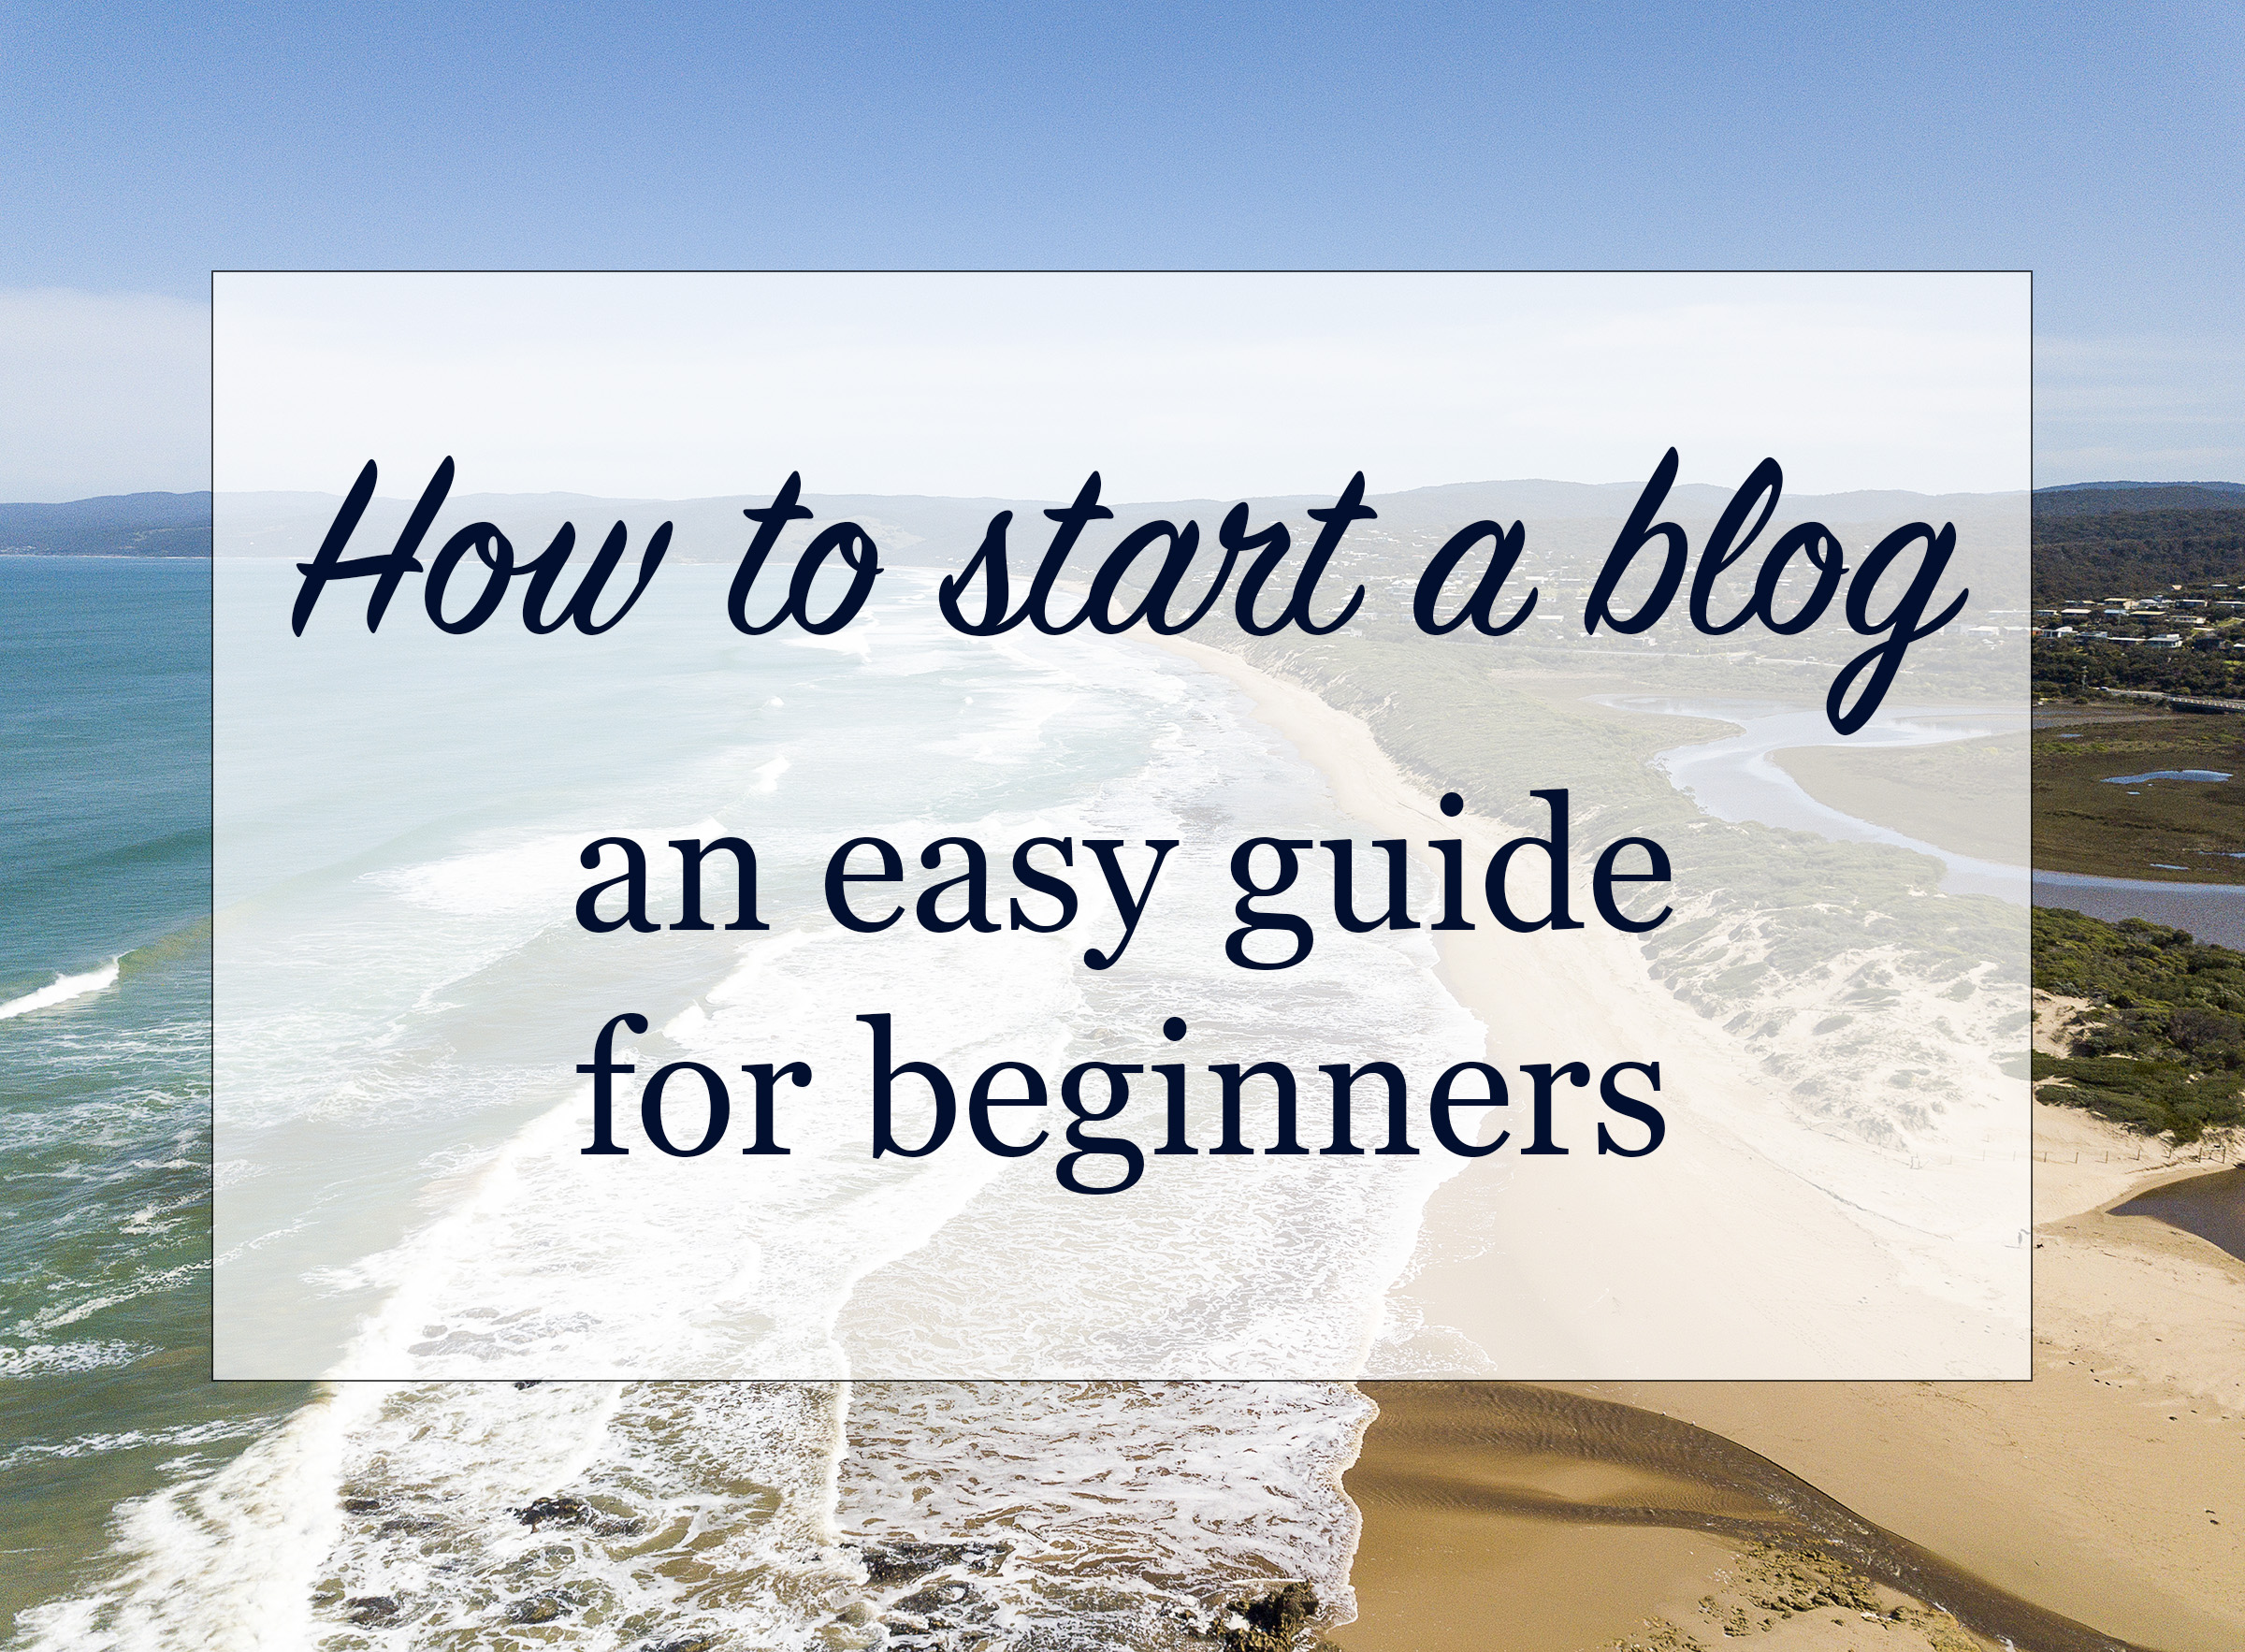 How to start a blog: an easy guide for beginners